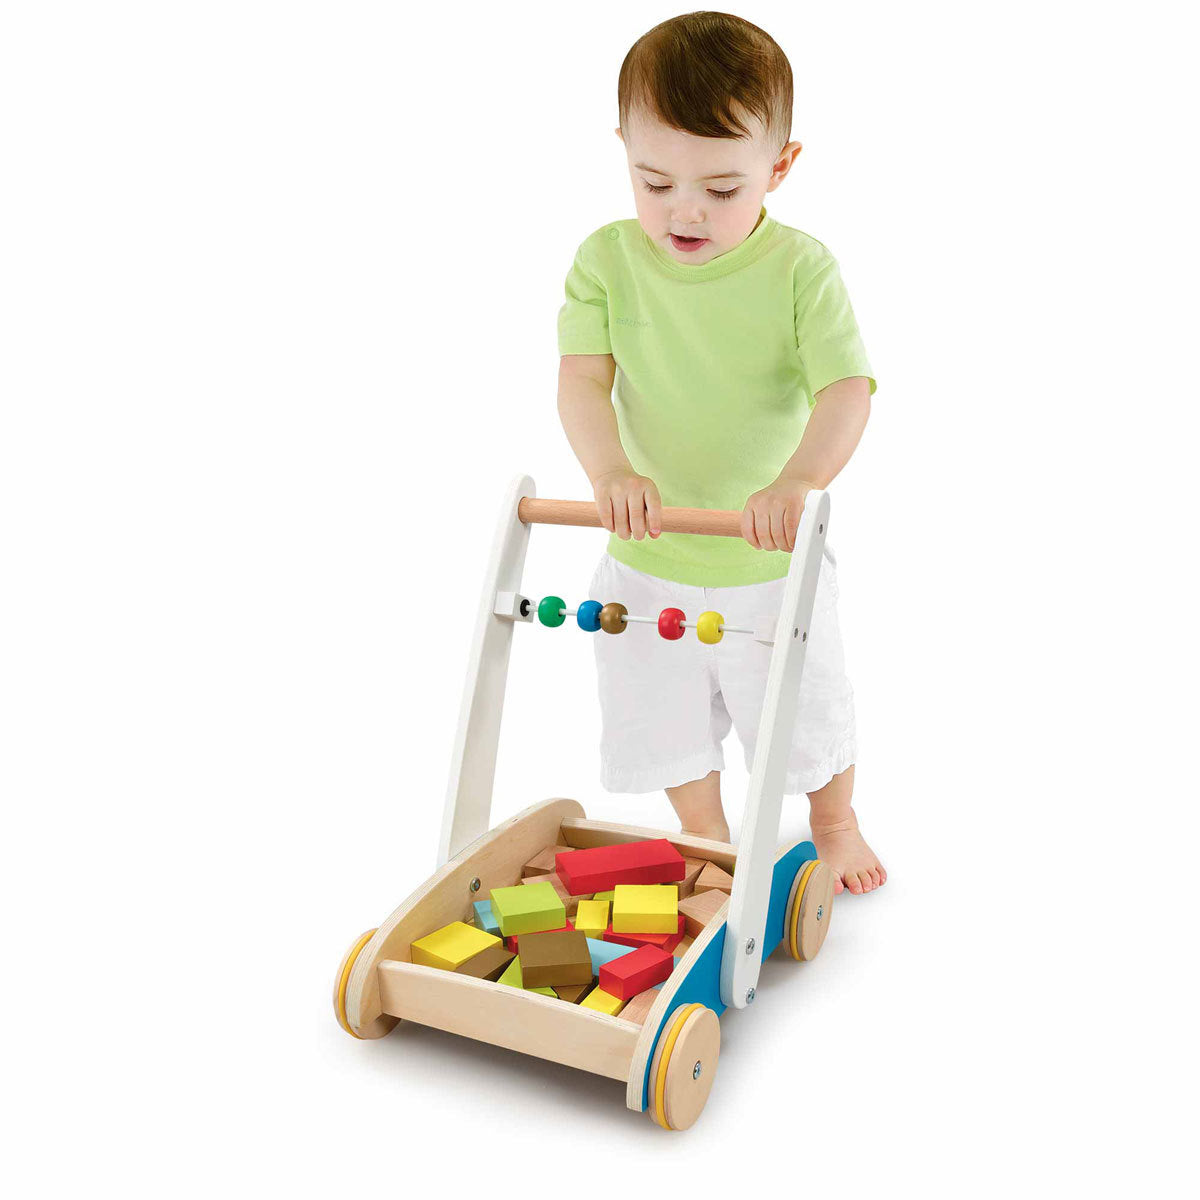 Early Learning Centre Wooden Toddle Truck